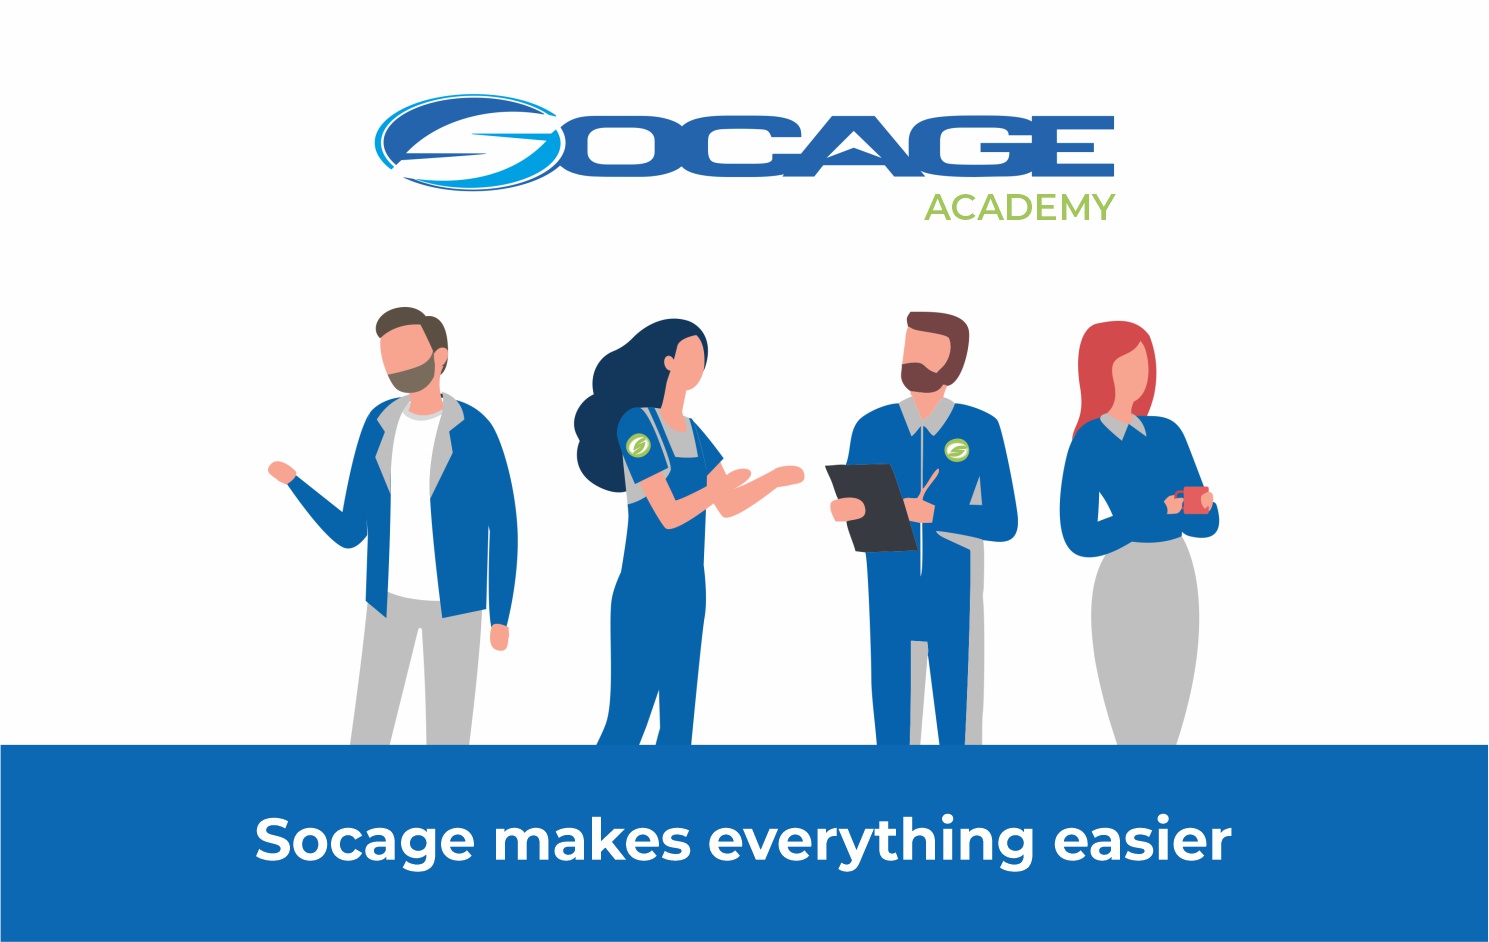 Socage Academy | Socage makes everything easier